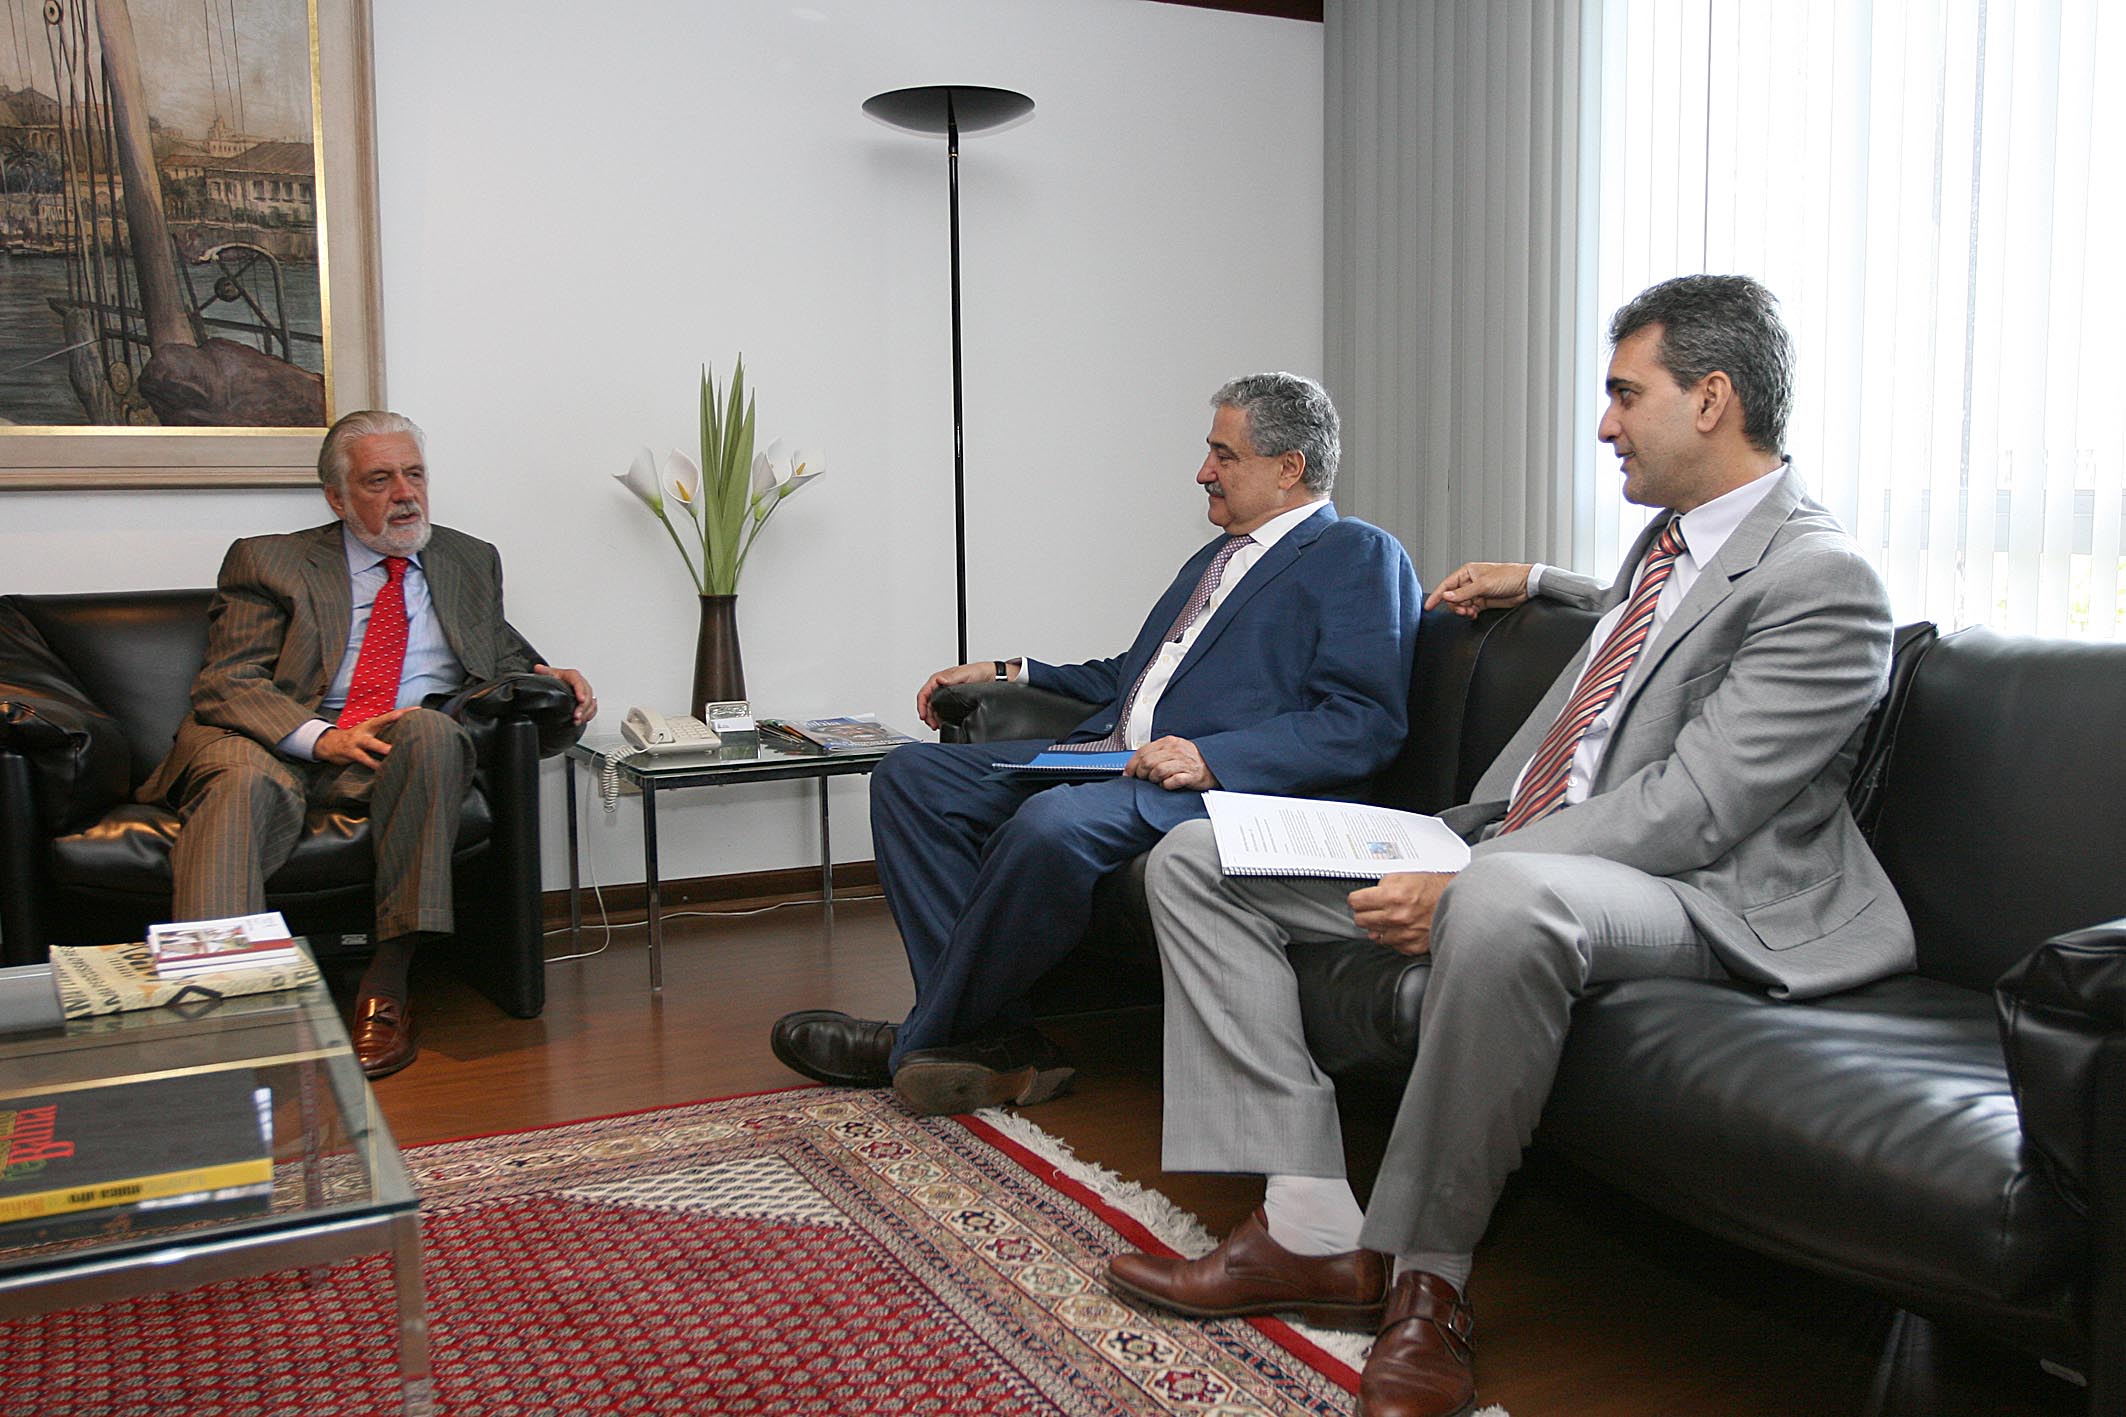 three men in business suits sit in a room